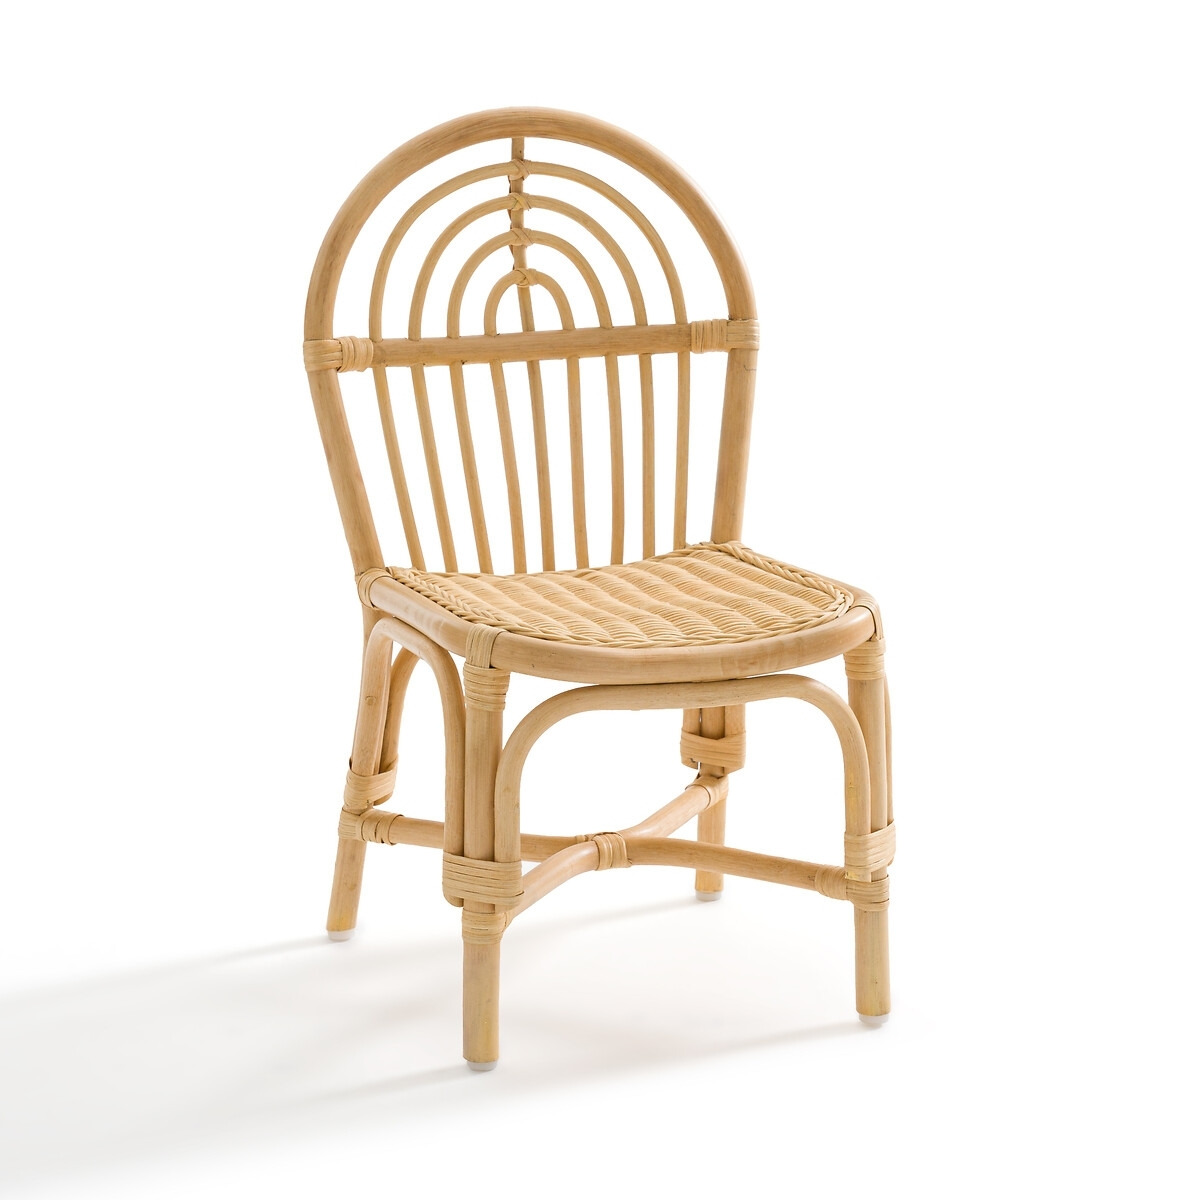 Thao Rattan Child's Chair - image 1